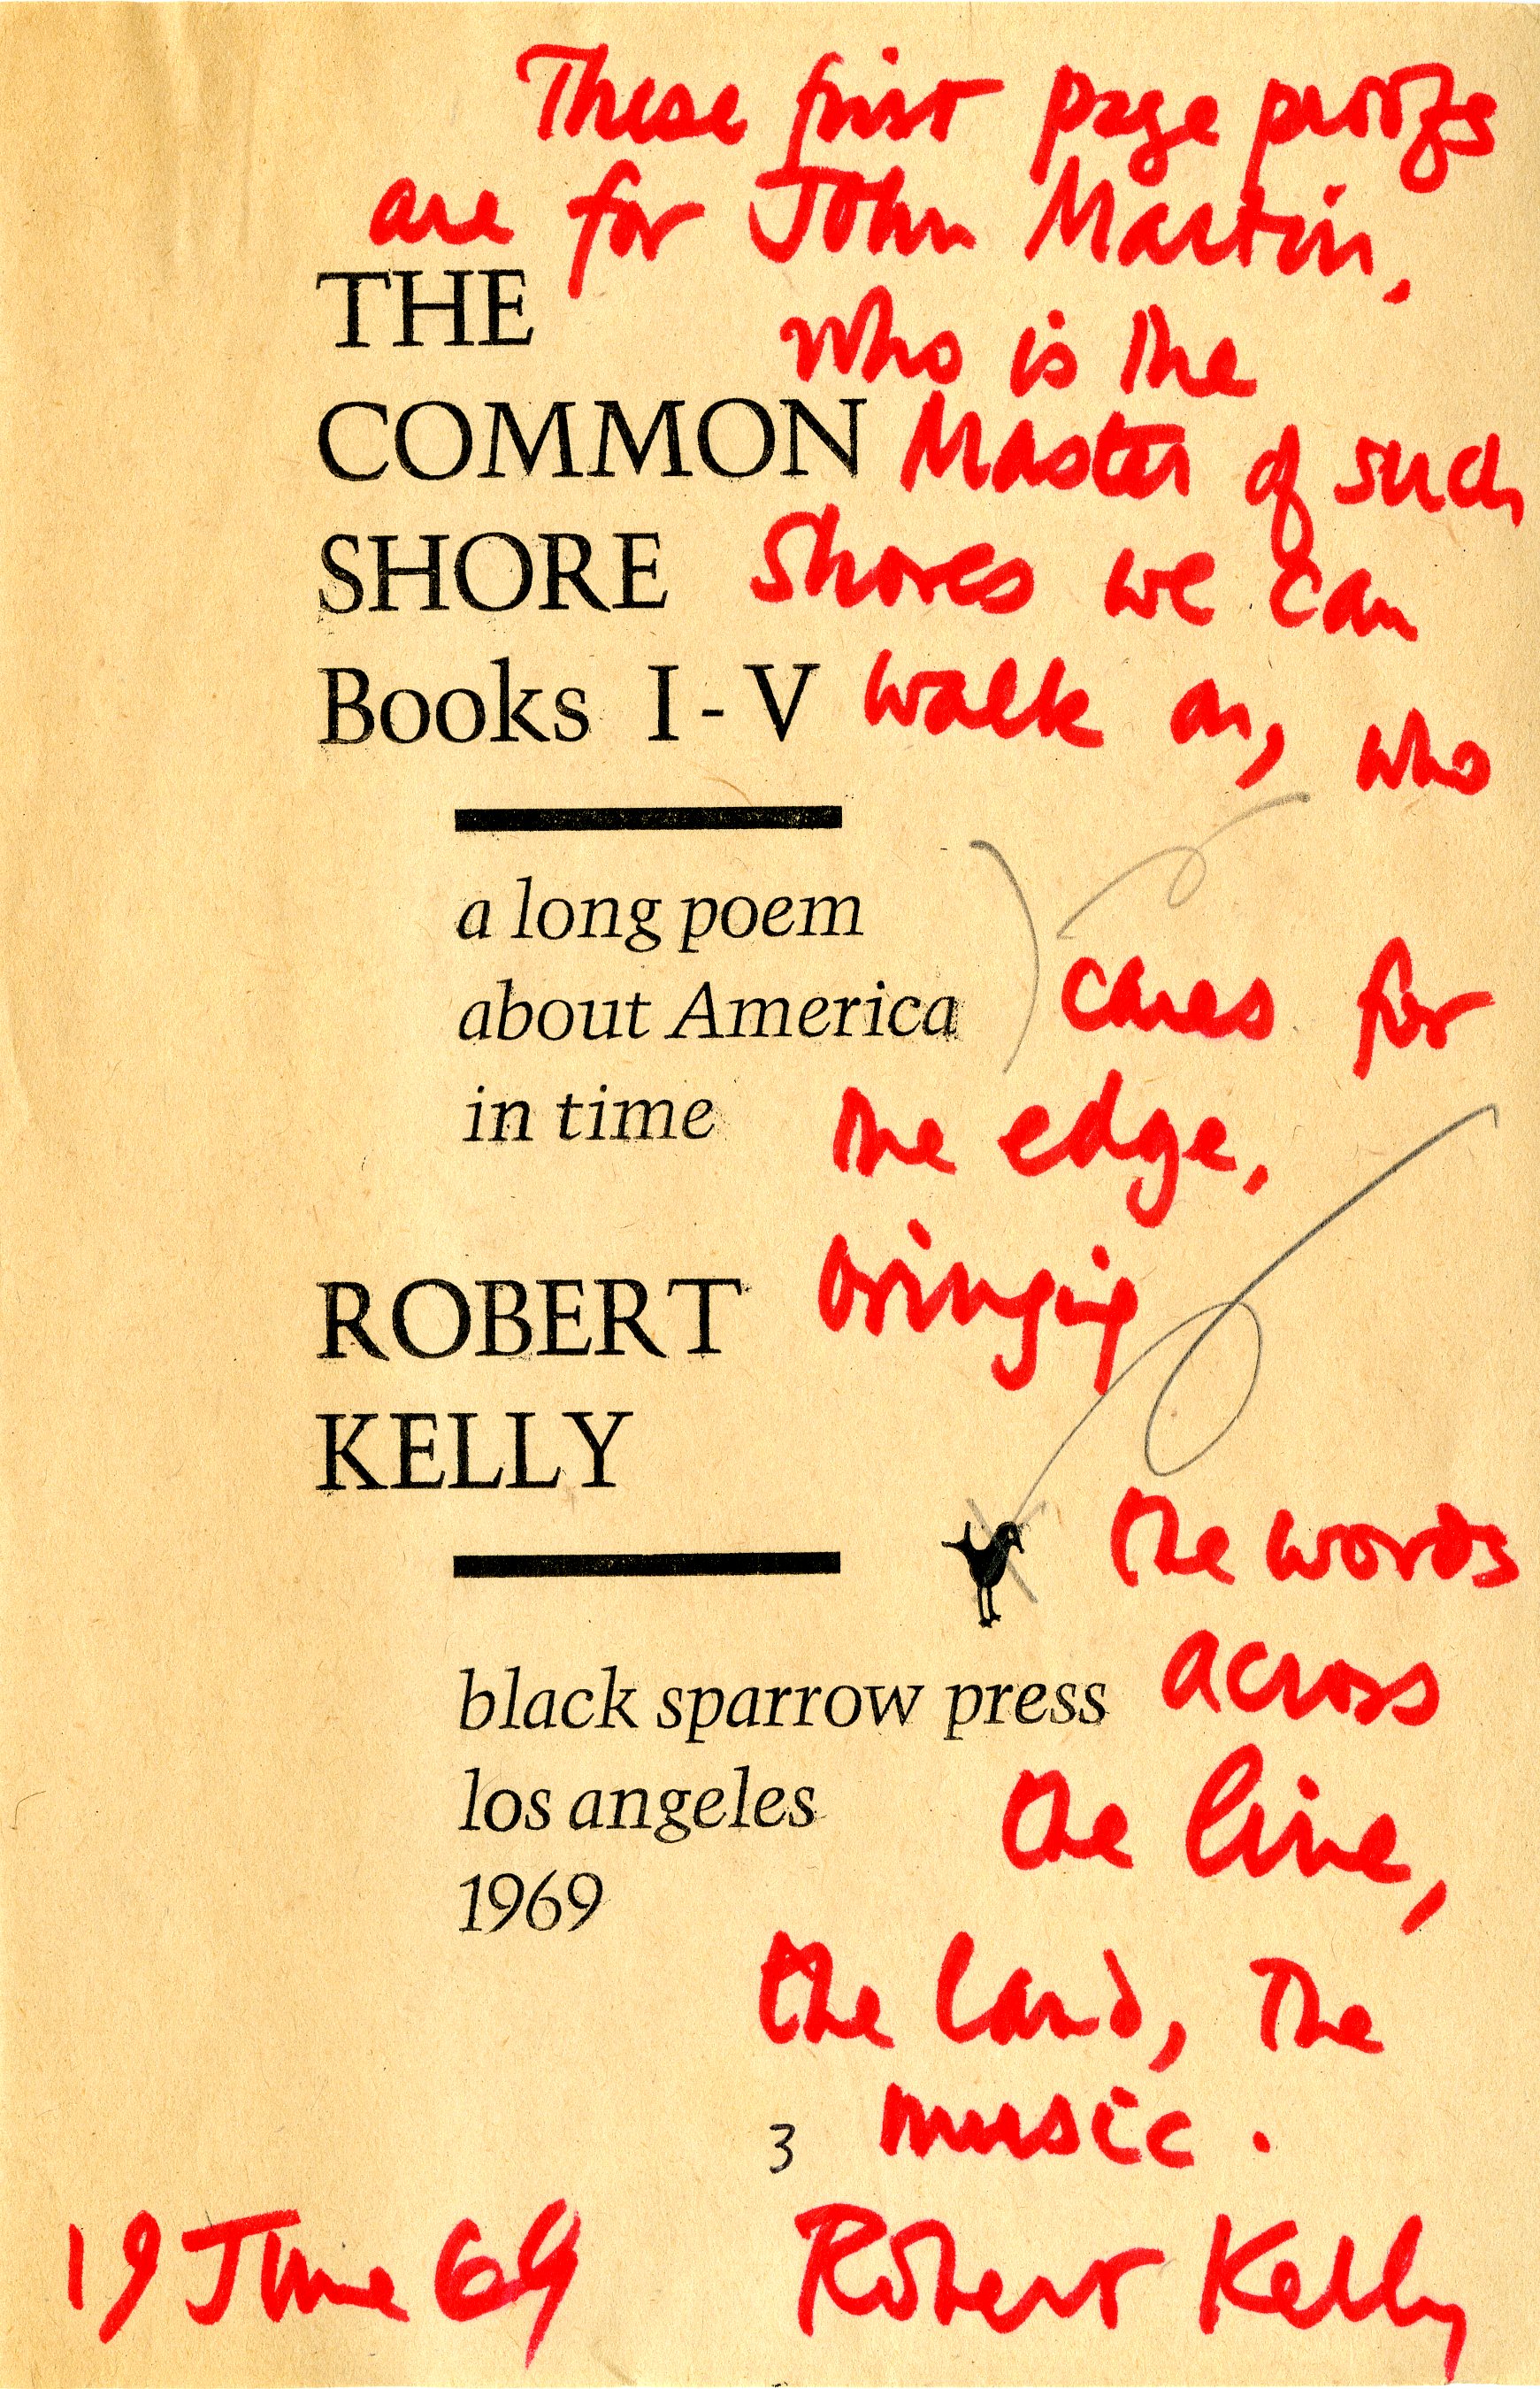 Kelly, Robert. The Common Shore: Books I-V: a long poem about America in time (Black Sparrow, 1969). Printer’s proof from Noel Young. Inscribed for John Martin by Robert Kelly, June 19, 1969, from the Robert Kelly “The Uncommon Shore” collection